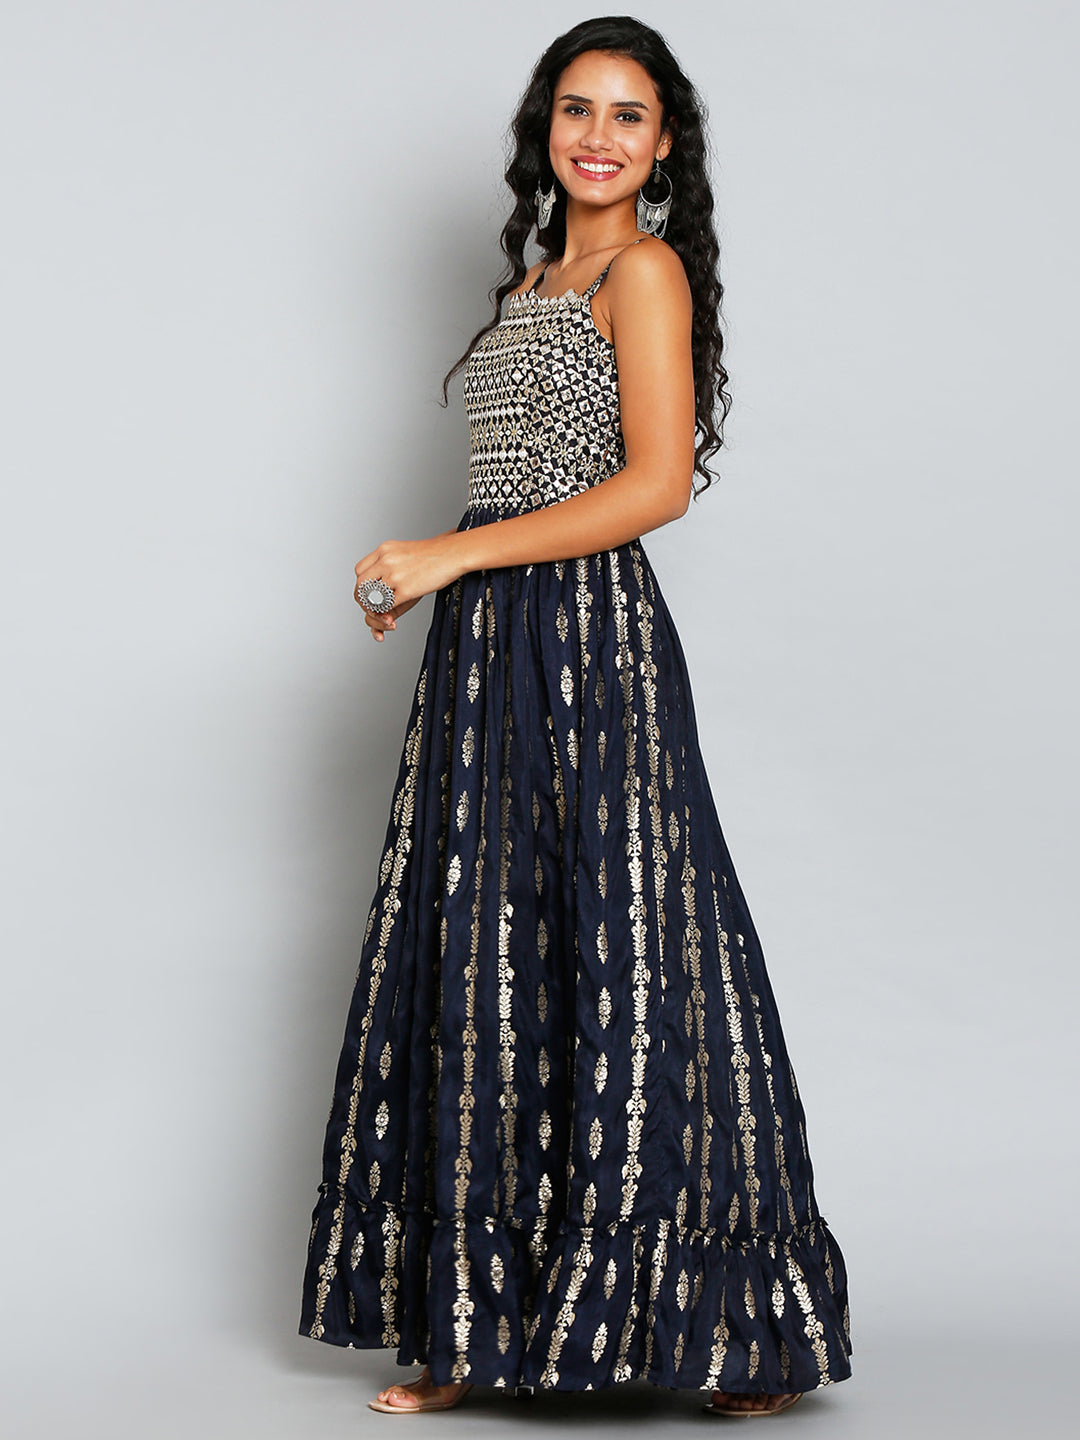 GOLD AND BLACK BROCADE EVENING GOWN A stunning floral brocade evening gown  with pale blue, pink and gold embroidery… | Party wear dresses, Gowns,  Beautiful dresses